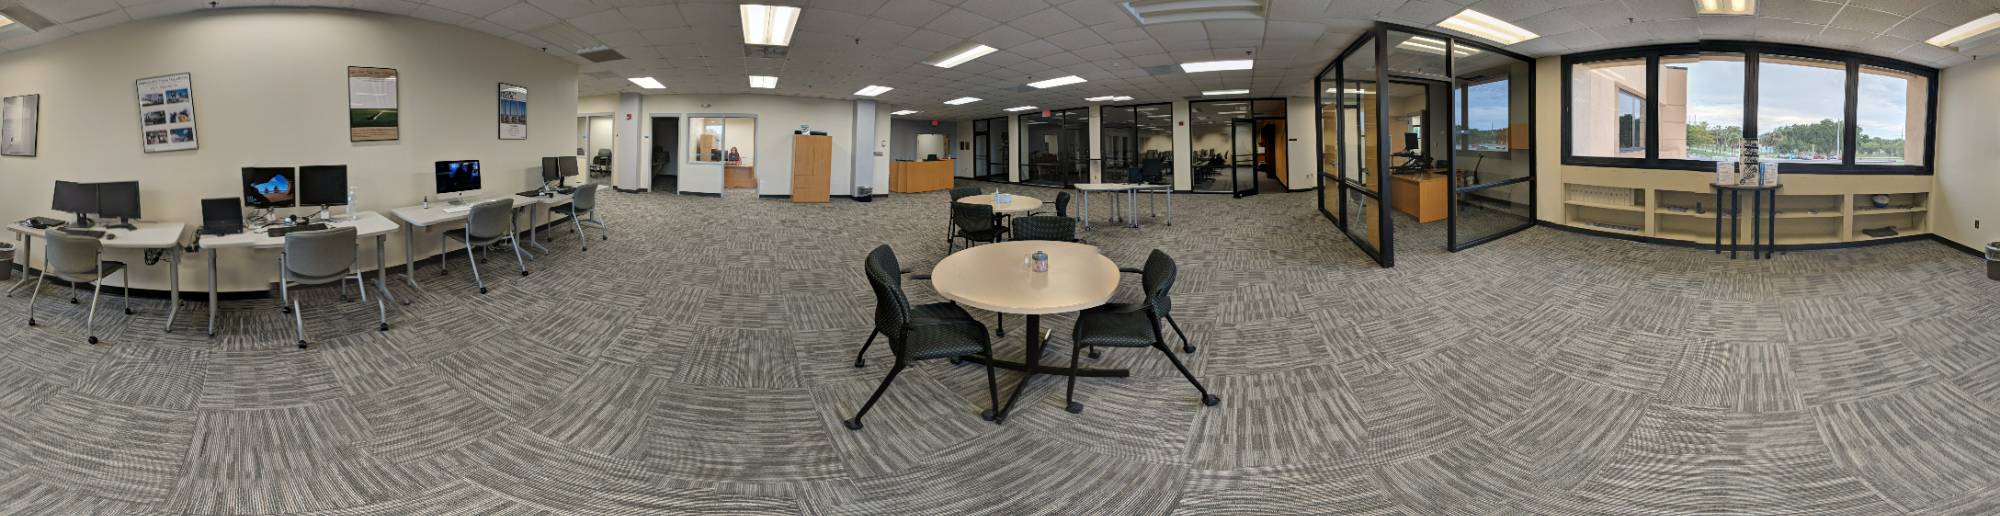 work spaces inside the faculty innovation center